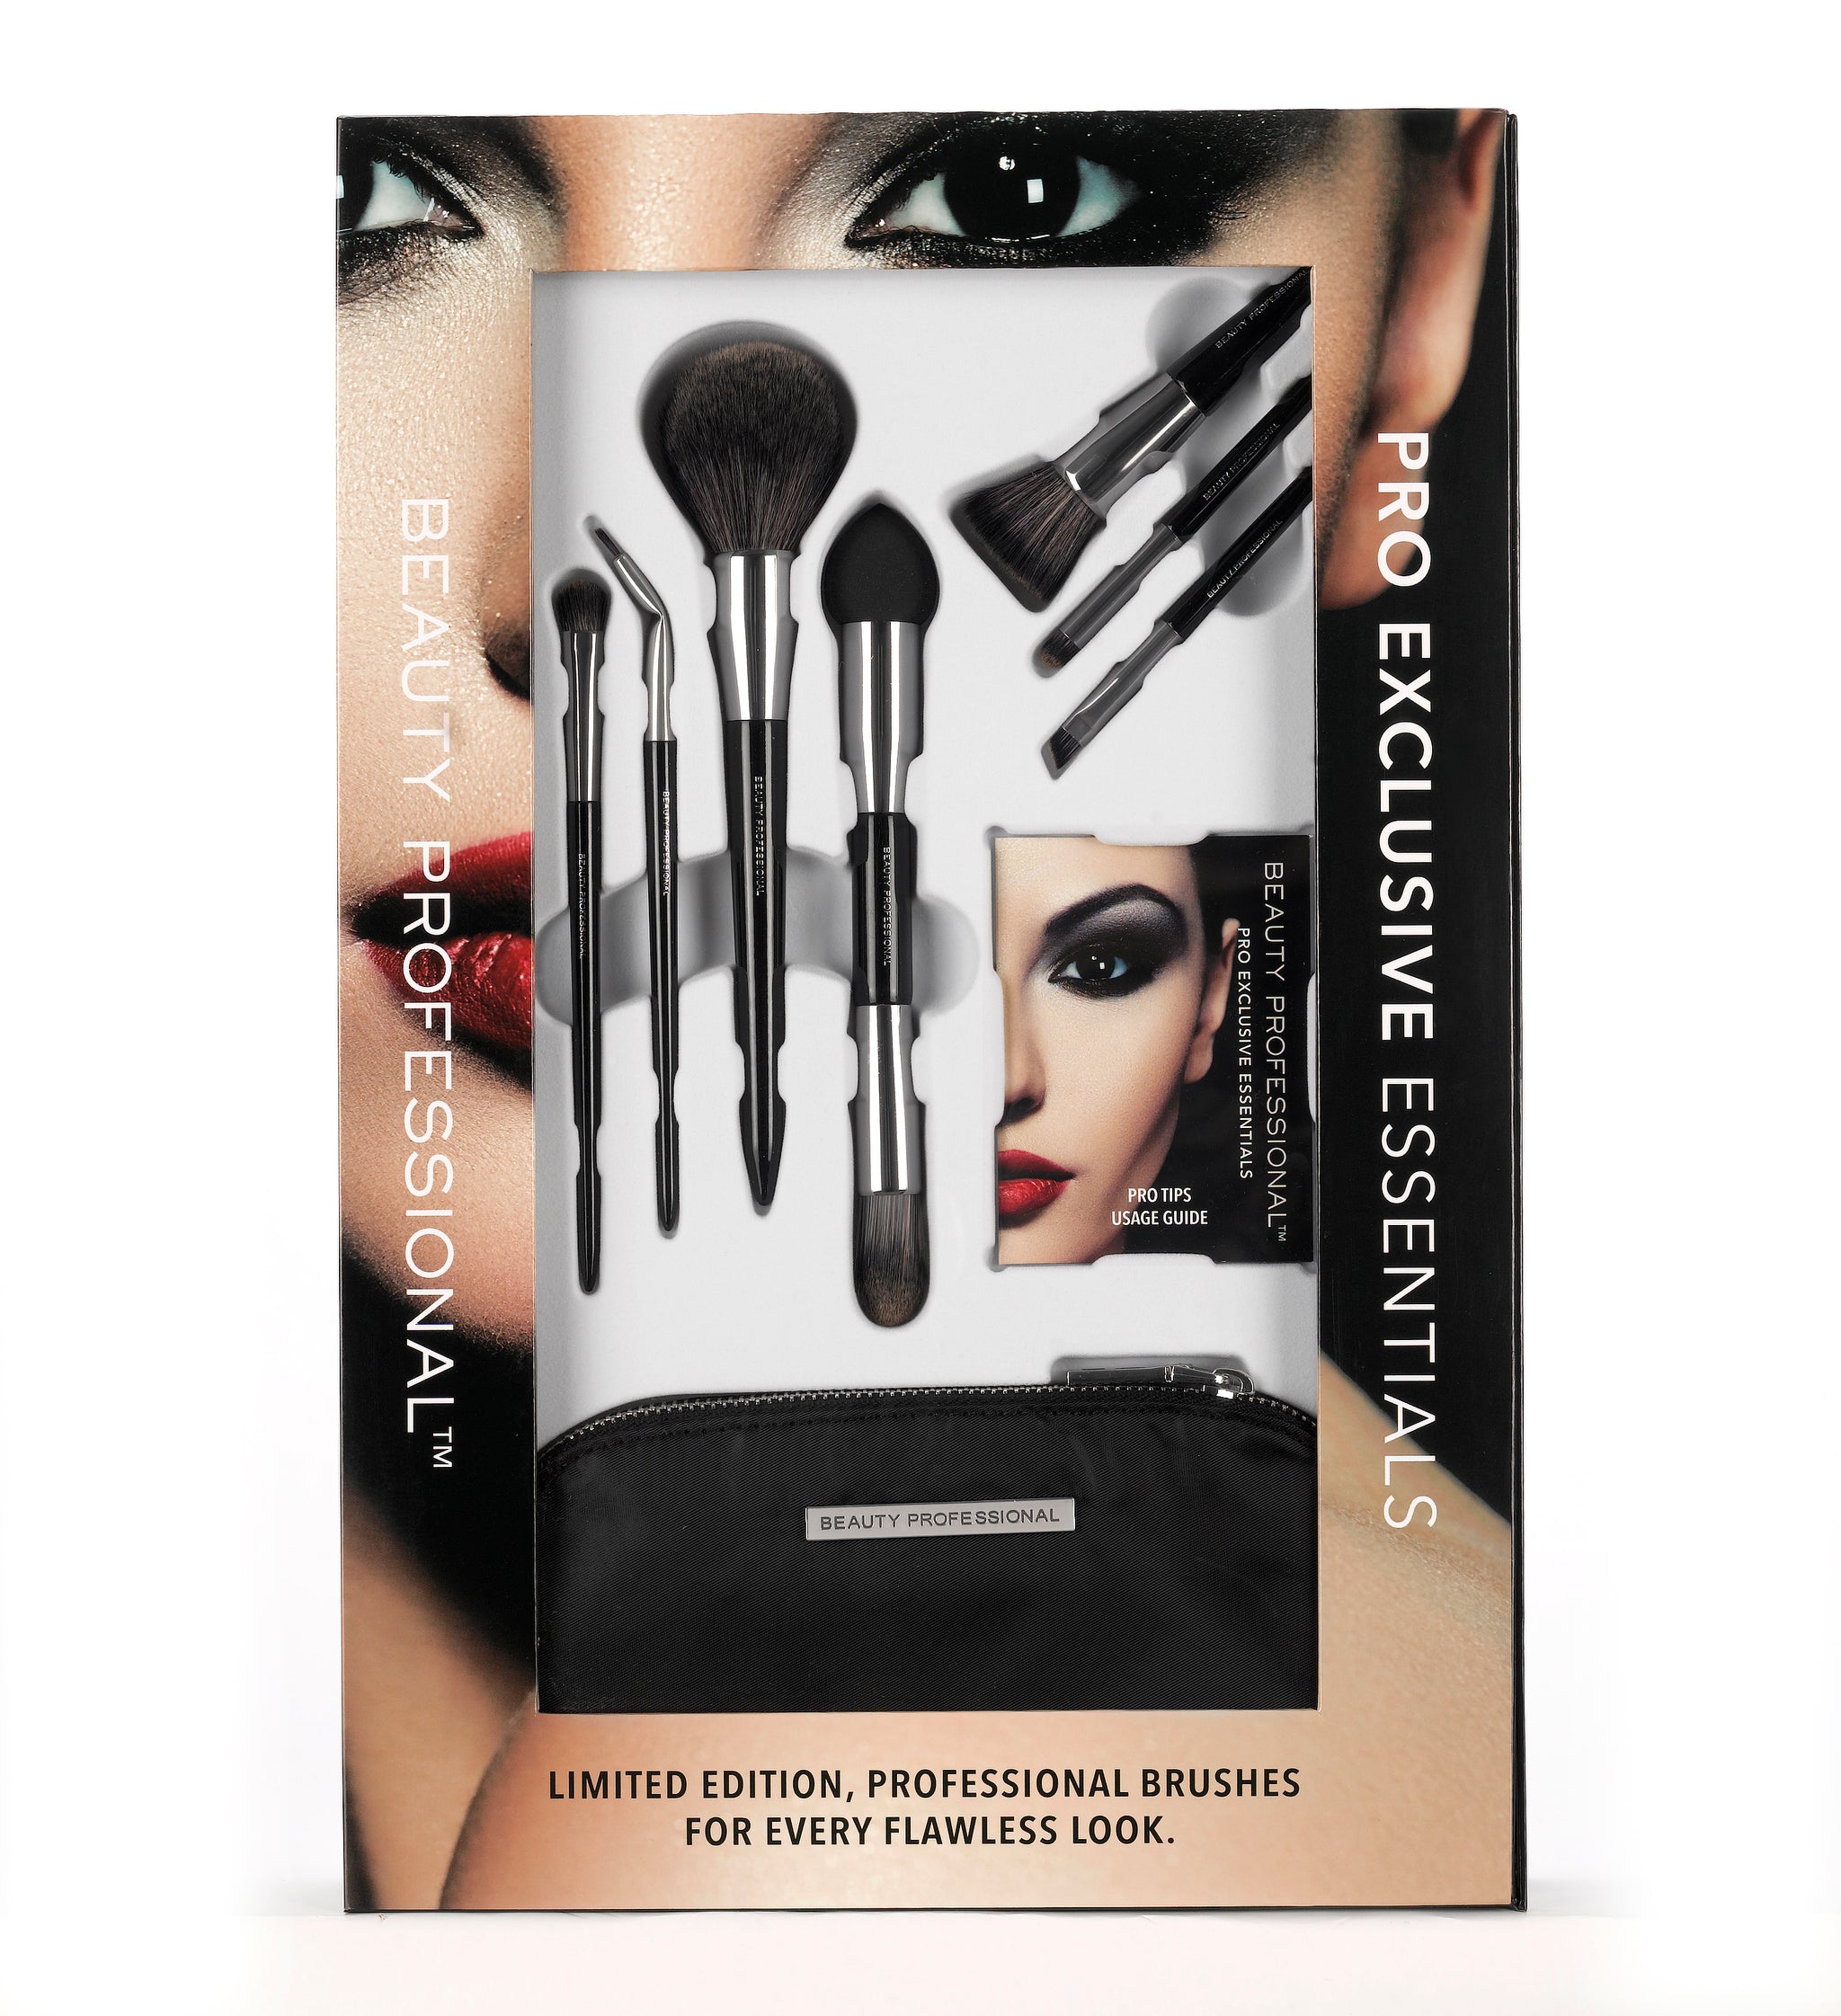 NEW PRO ESSENTIALS: A FULL AND TRAVEL-SIZED BRUSH SET | beautyprofessional